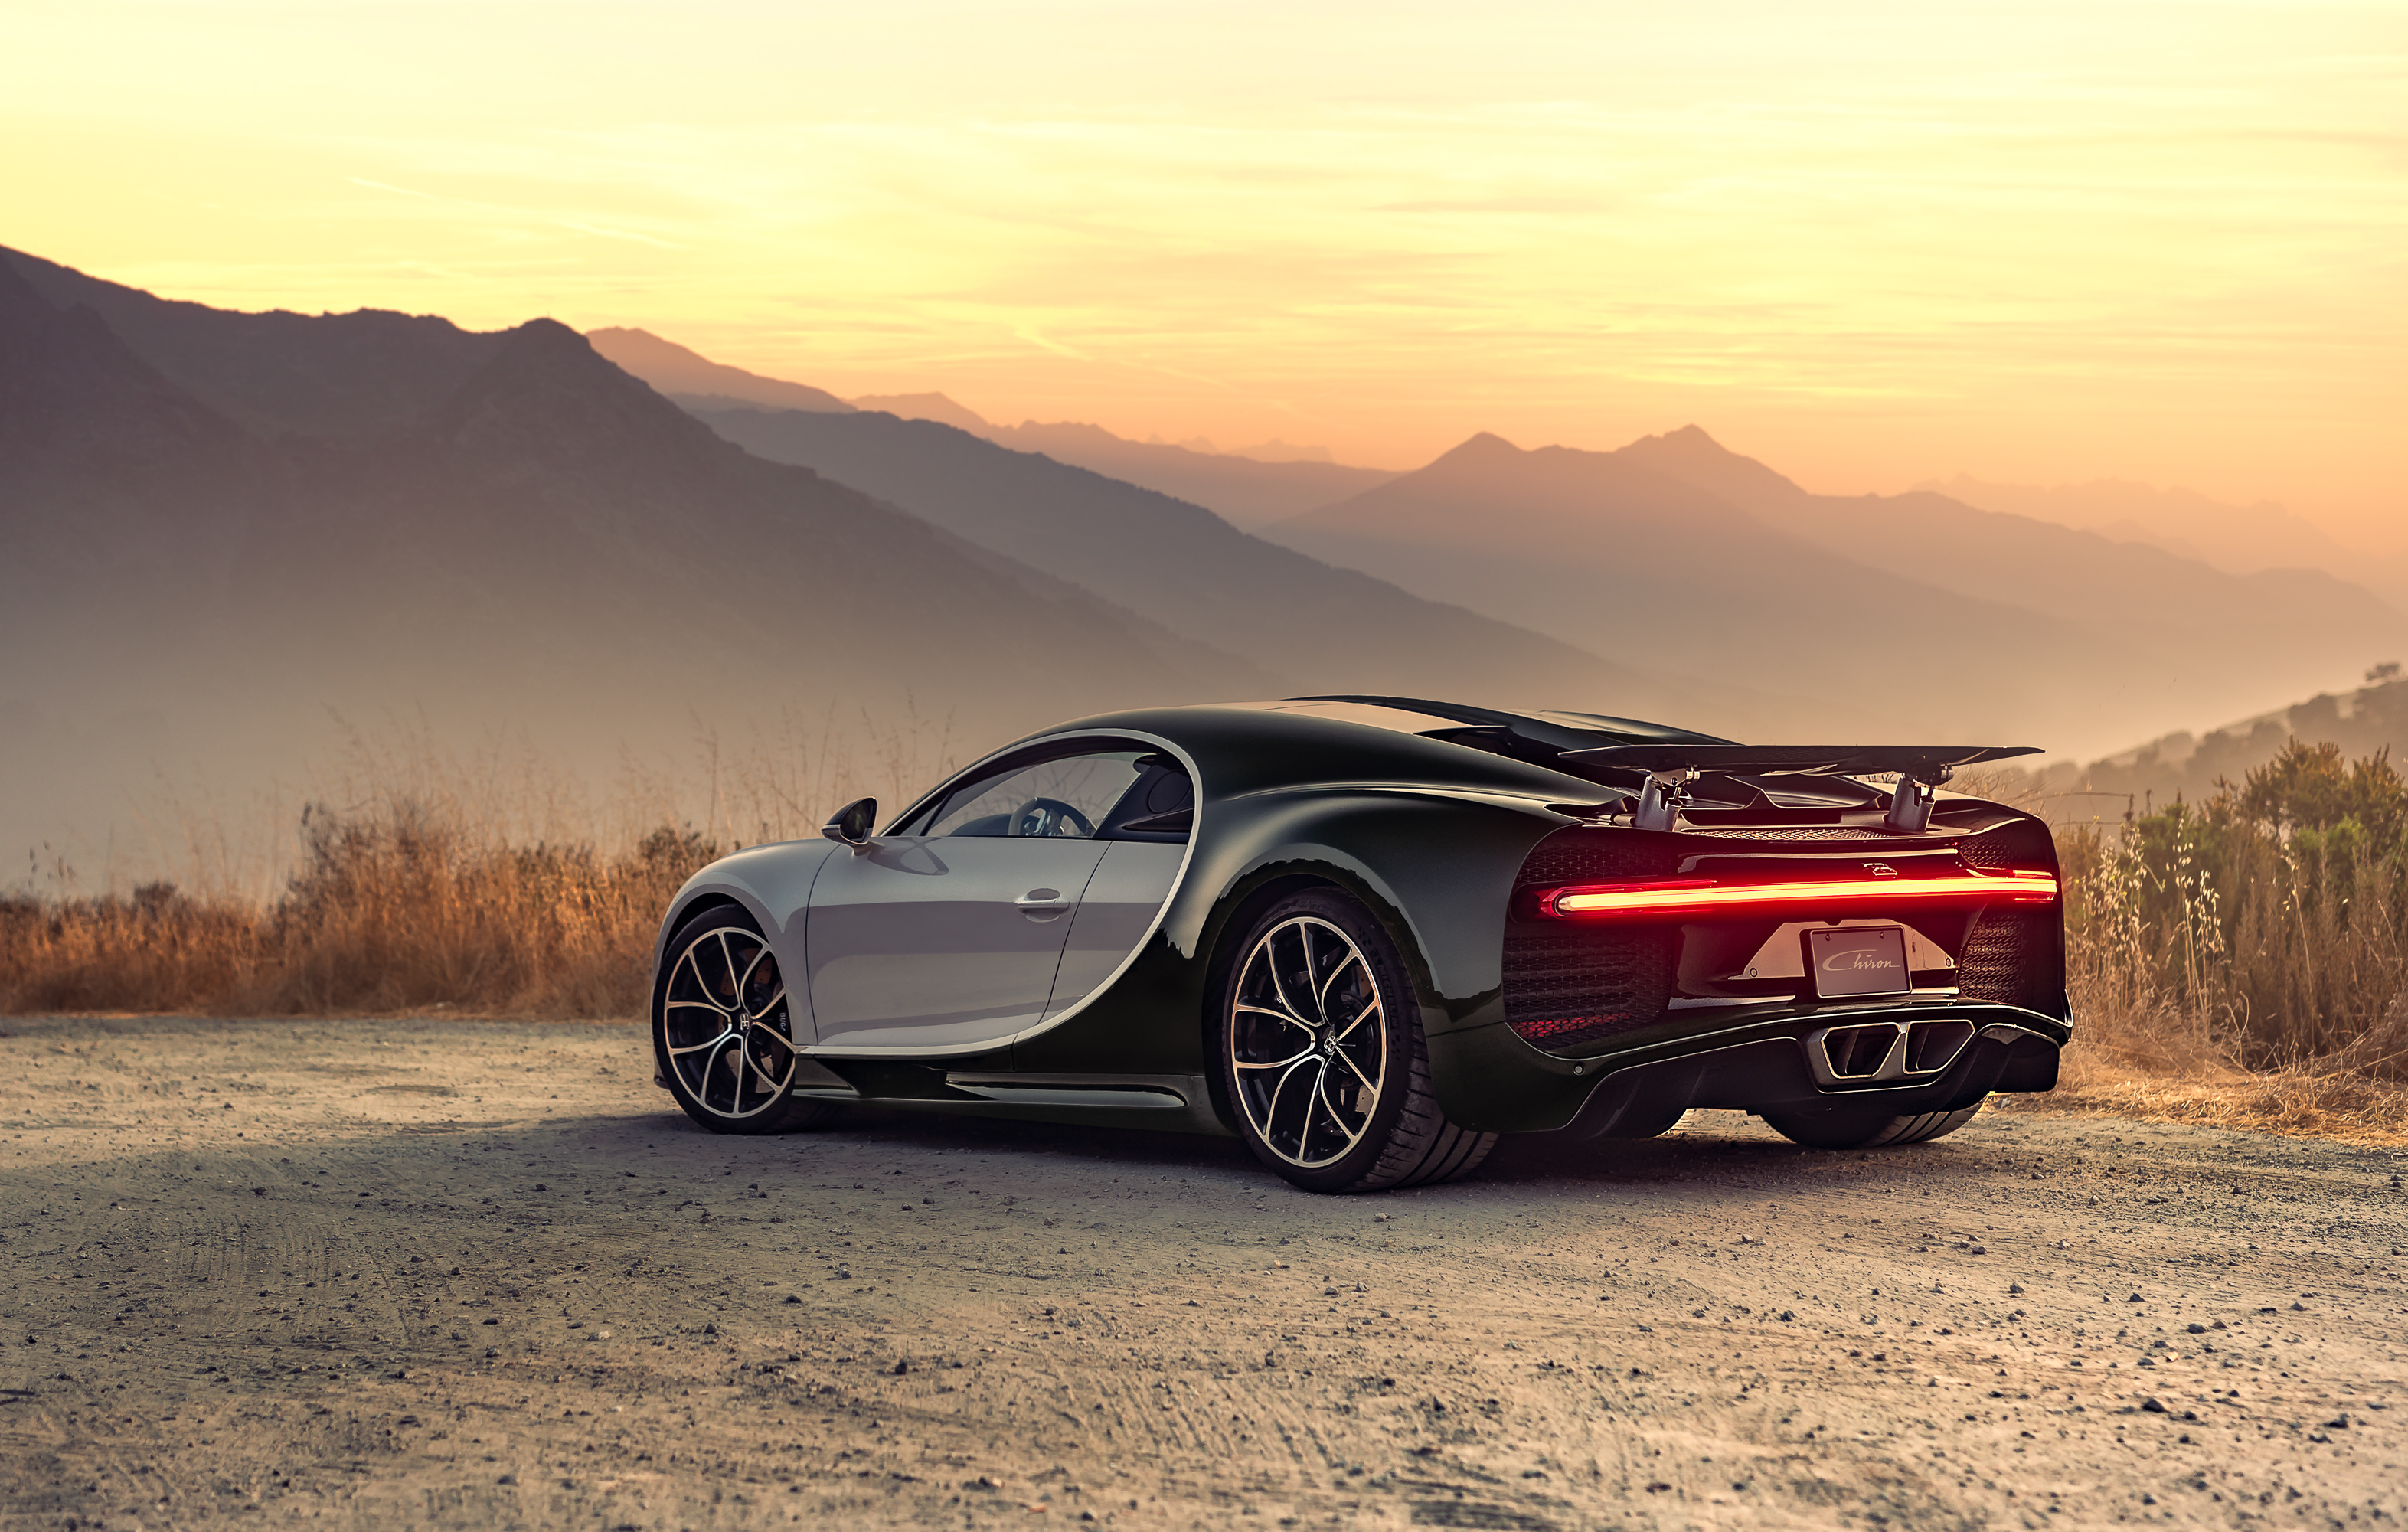 Bugatti Chiron Rear 4k, HD Cars, 4k Wallpapers, Images, Backgrounds